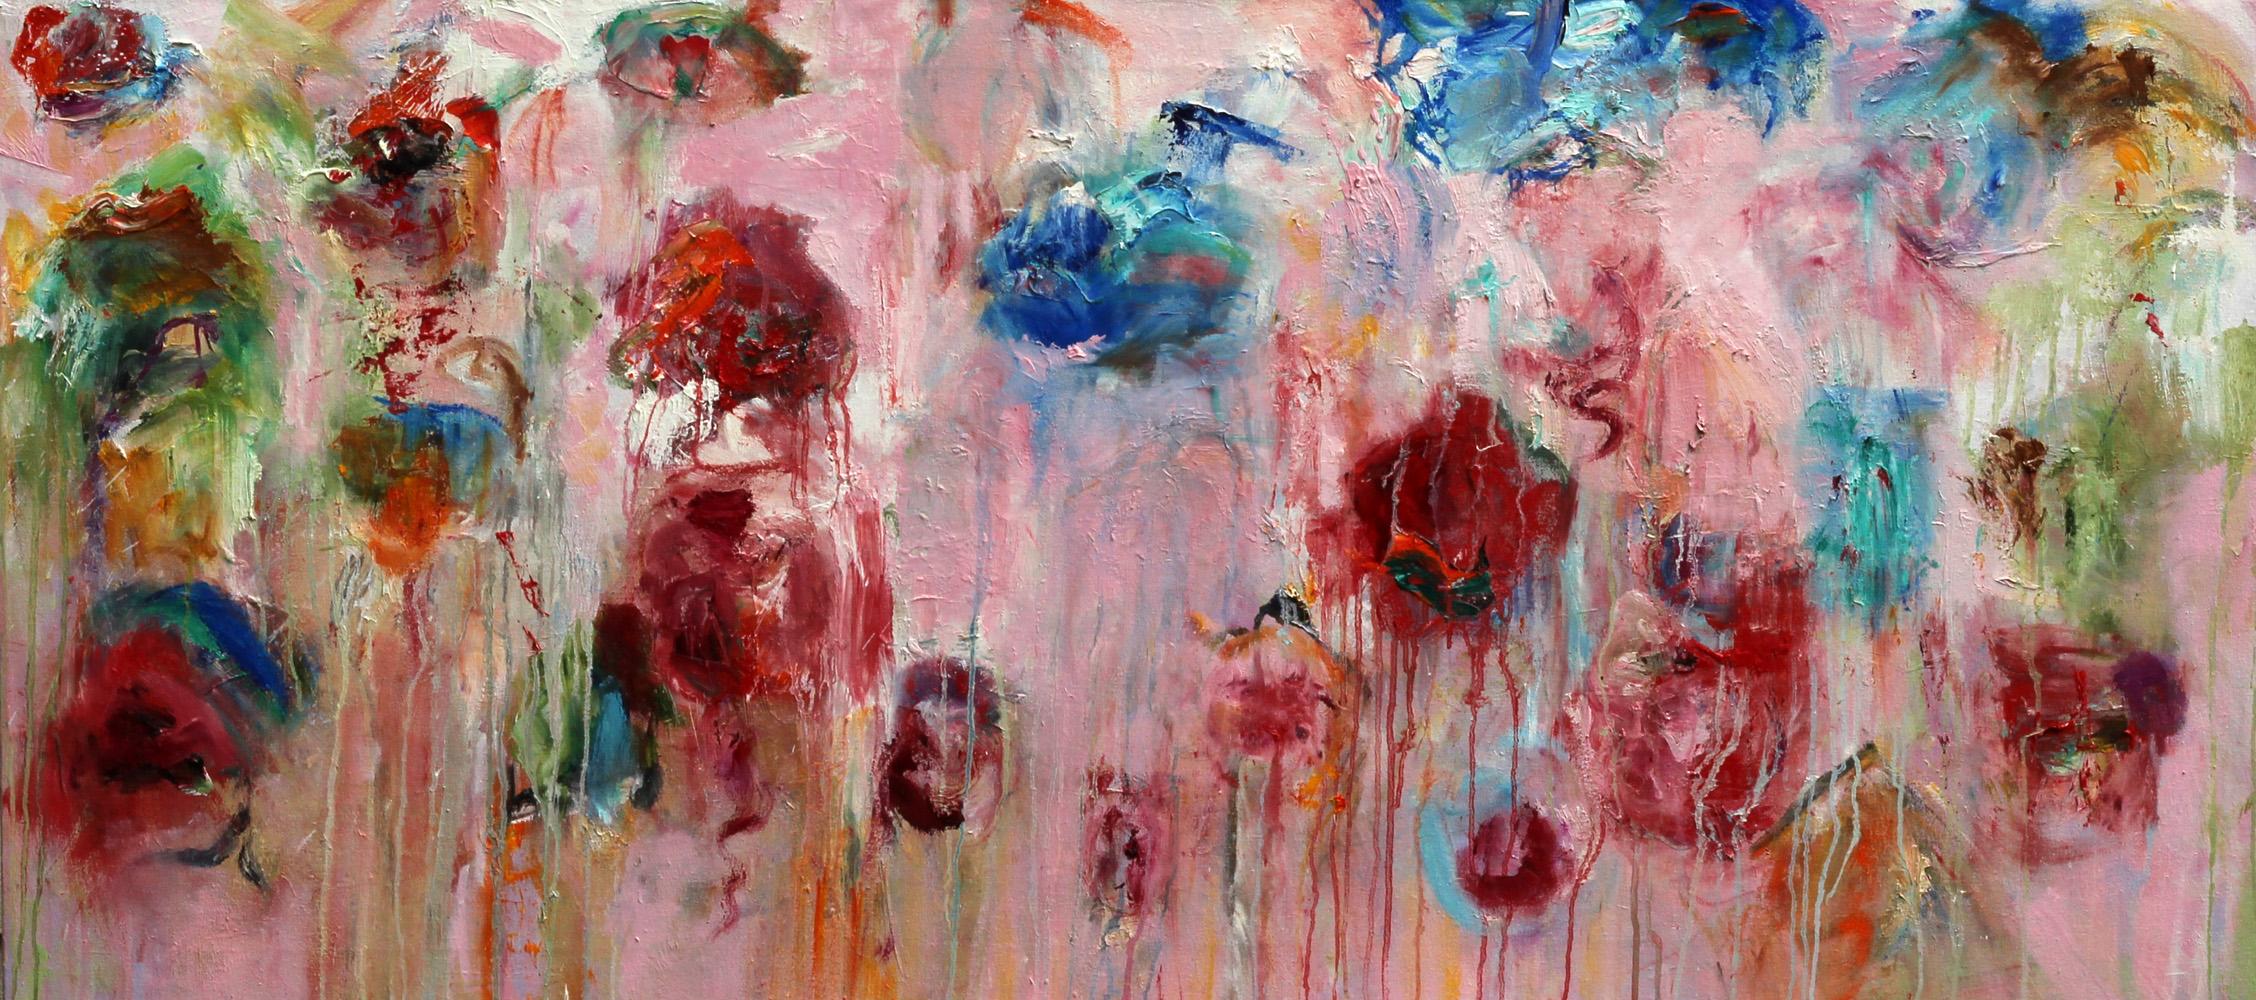 "Figments", abstract, expressionist, pink, red, blue, green, oil painting - Painting by Katherine Borkowski-Byrne